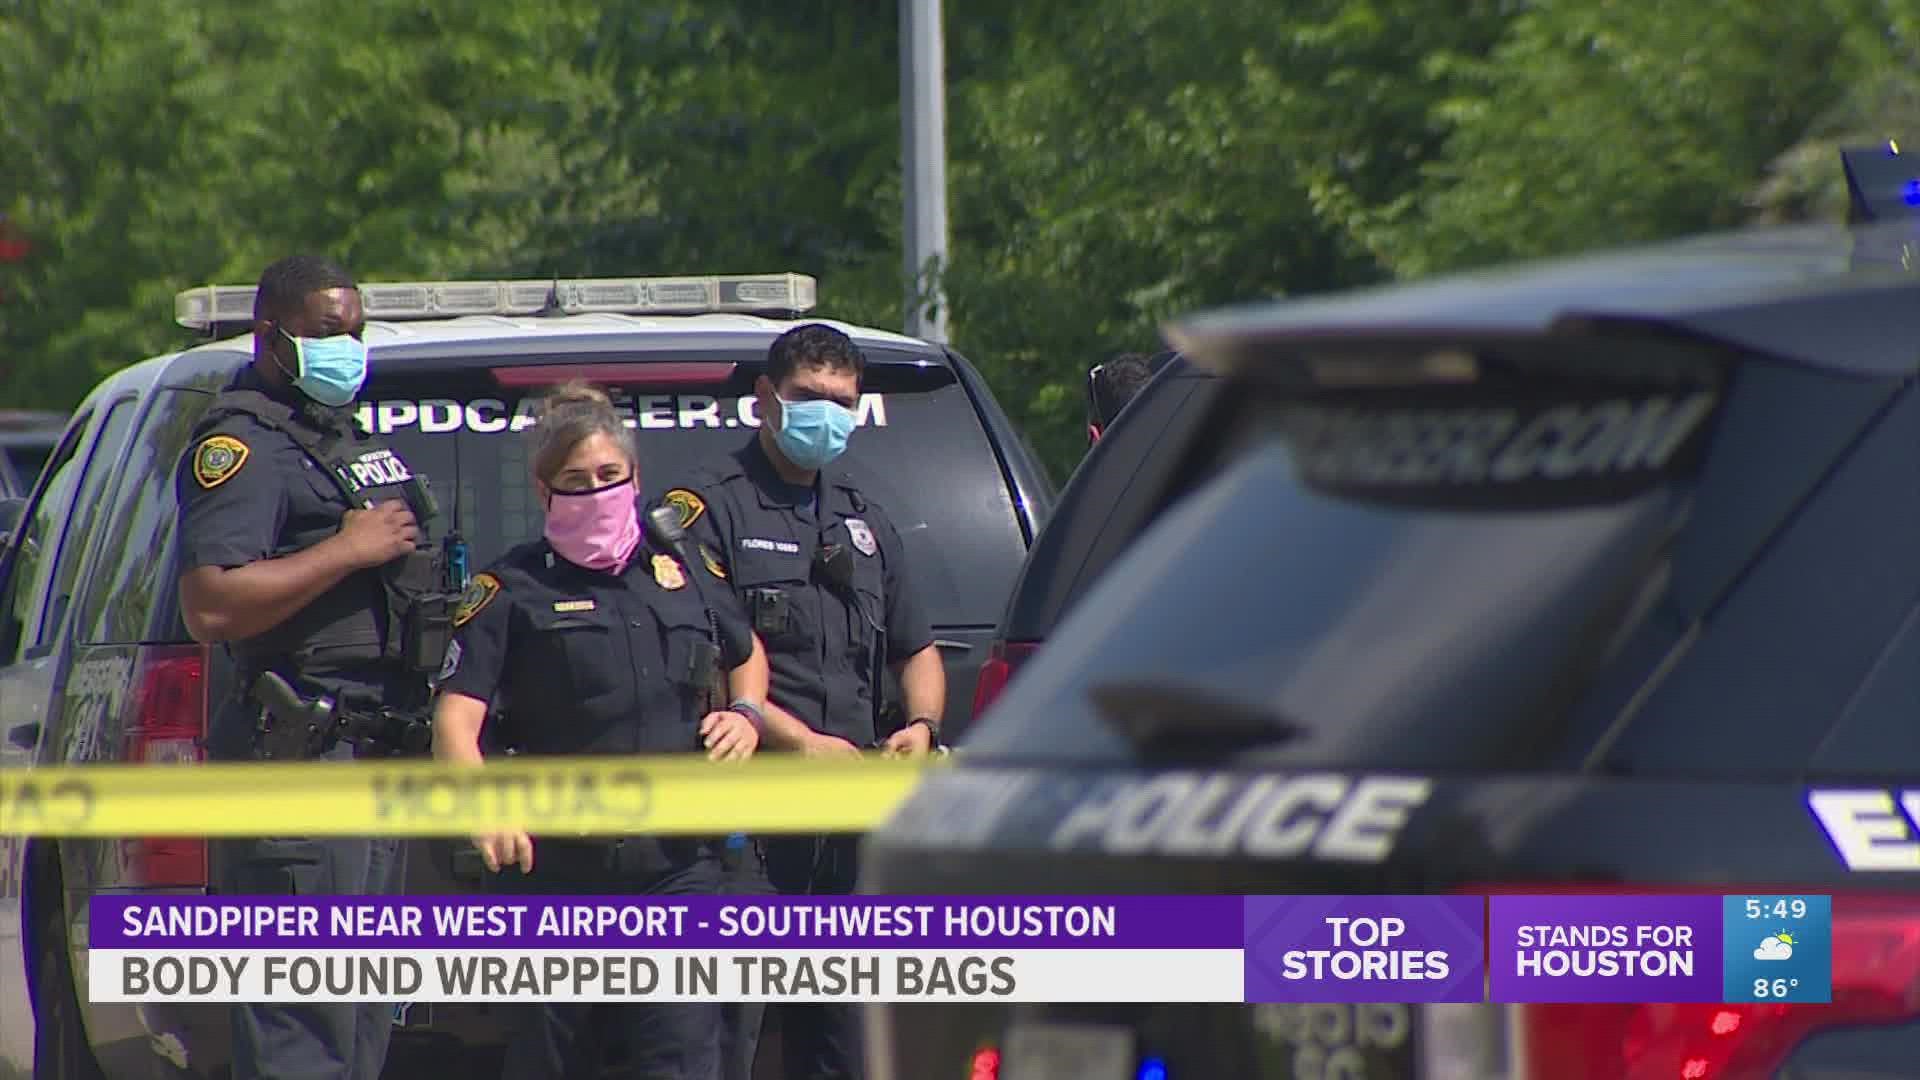 Houston police are awaiting autopsy results after a person was found wrapped in trash bags over the weekend.